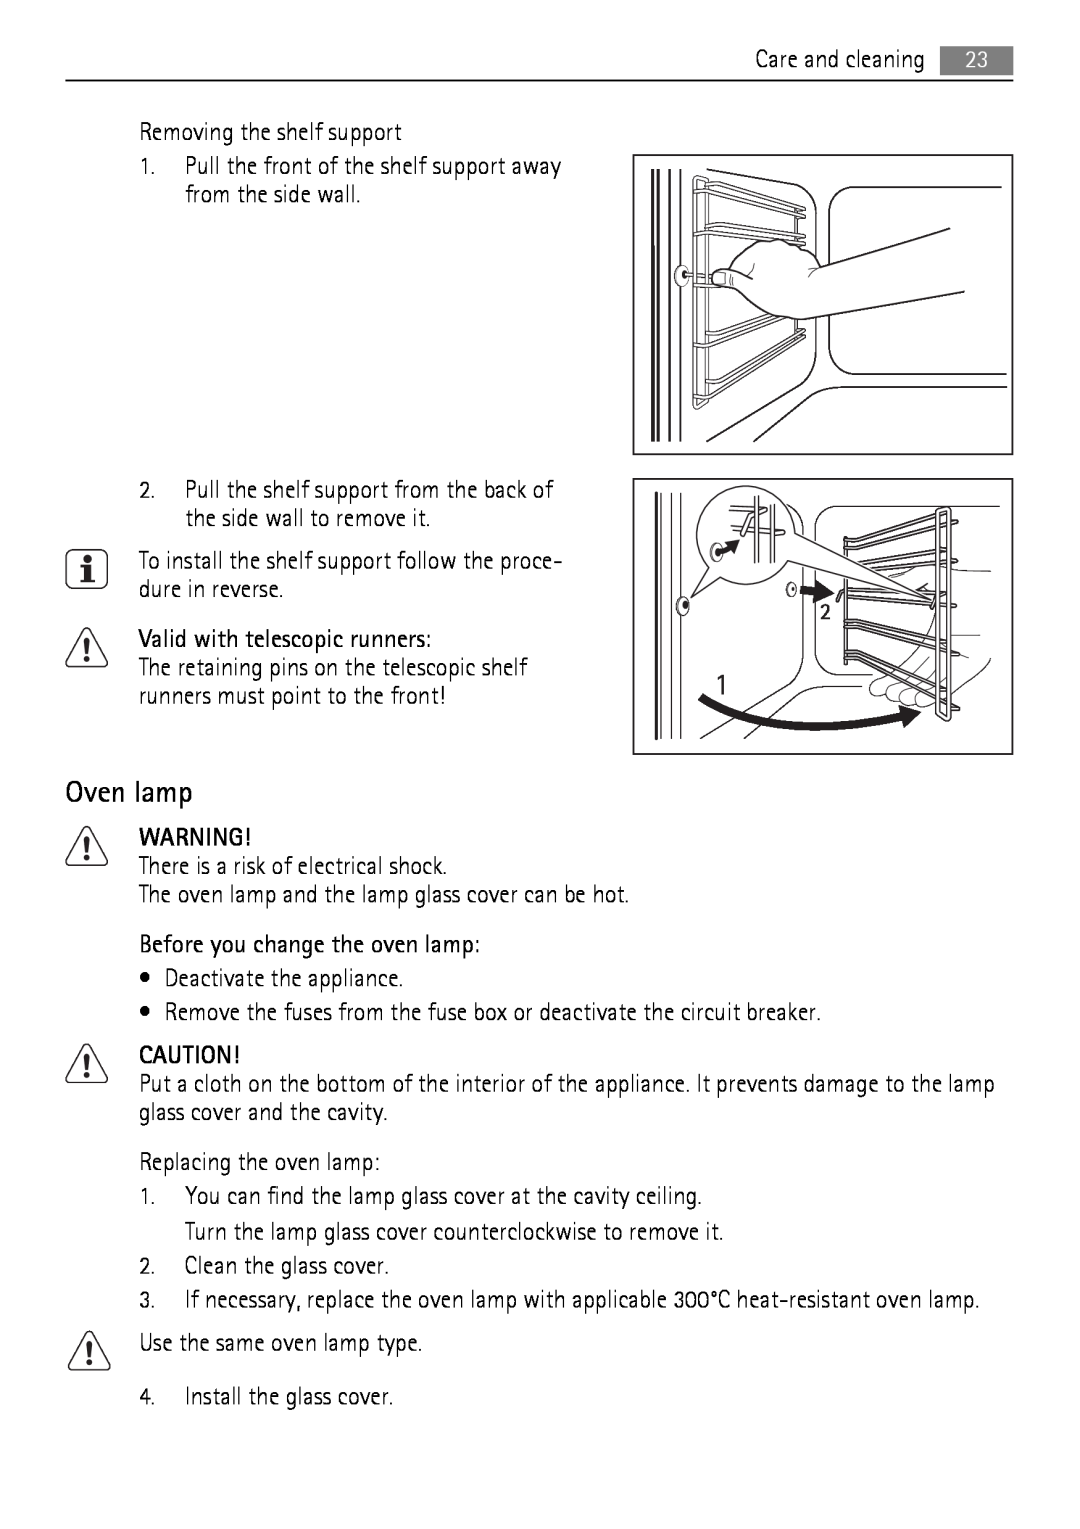 AEG BE3013021 user manual Oven lamp, Removing the shelf support 